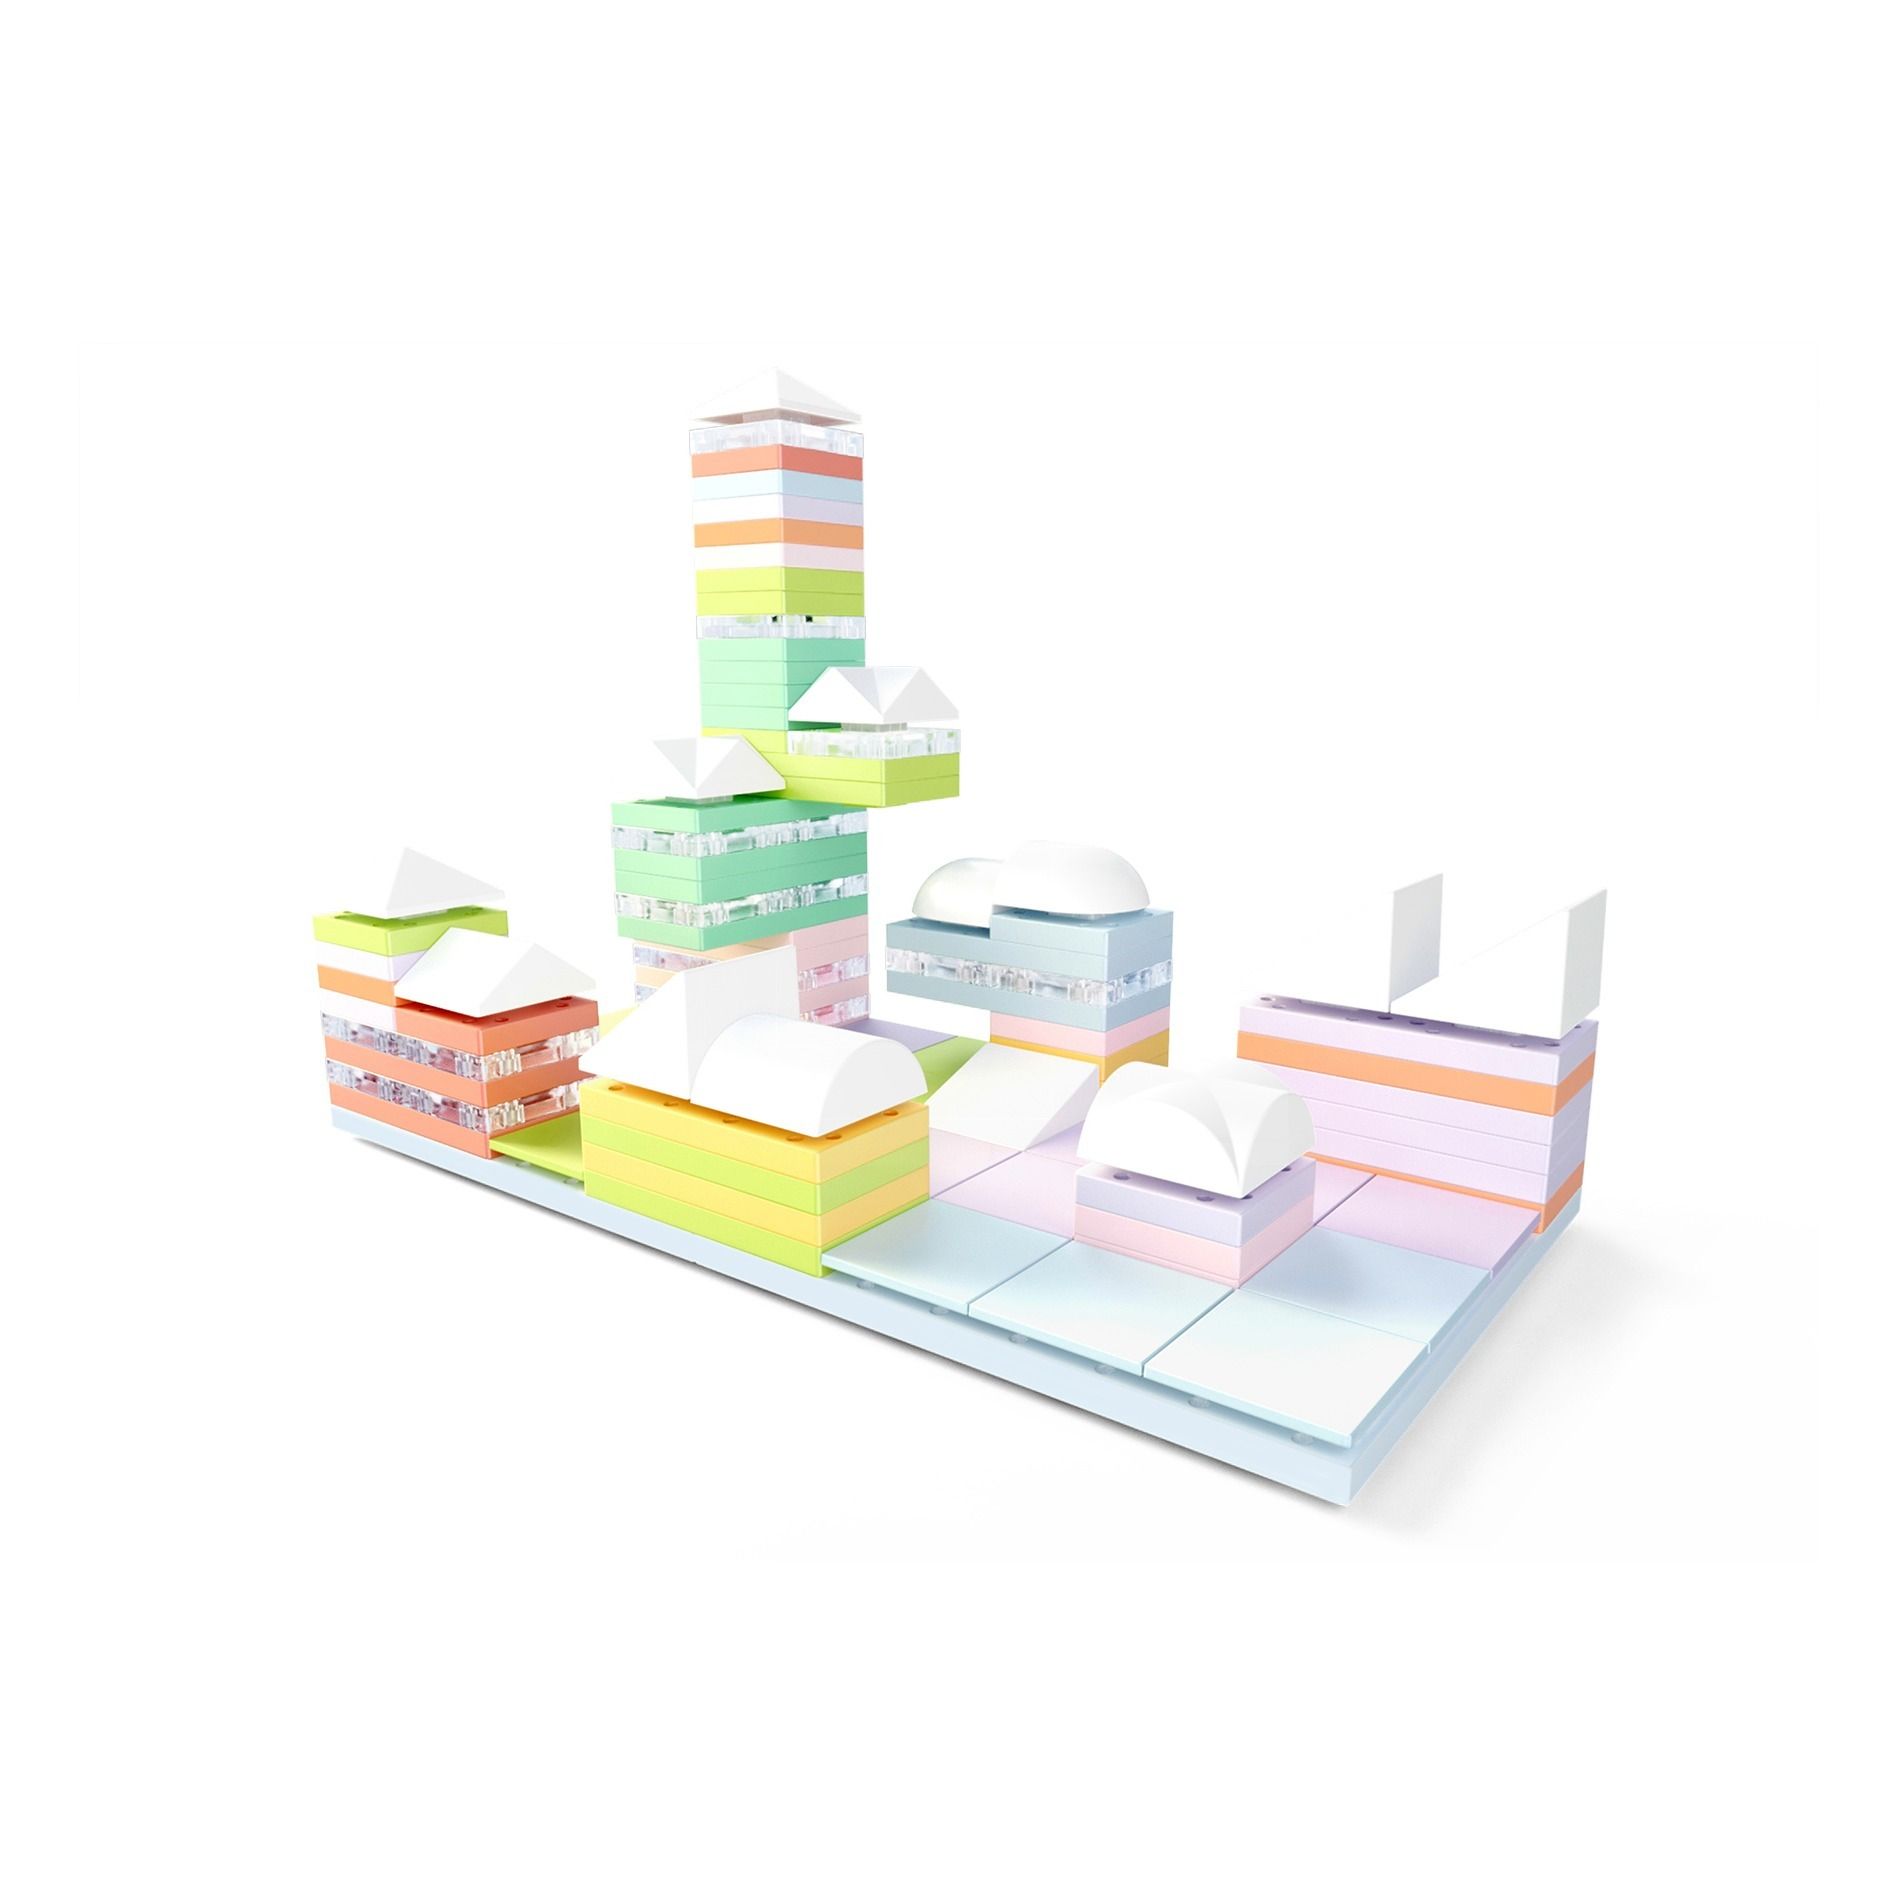 Arckit's architectural building blocks make LEGOs look like child's play